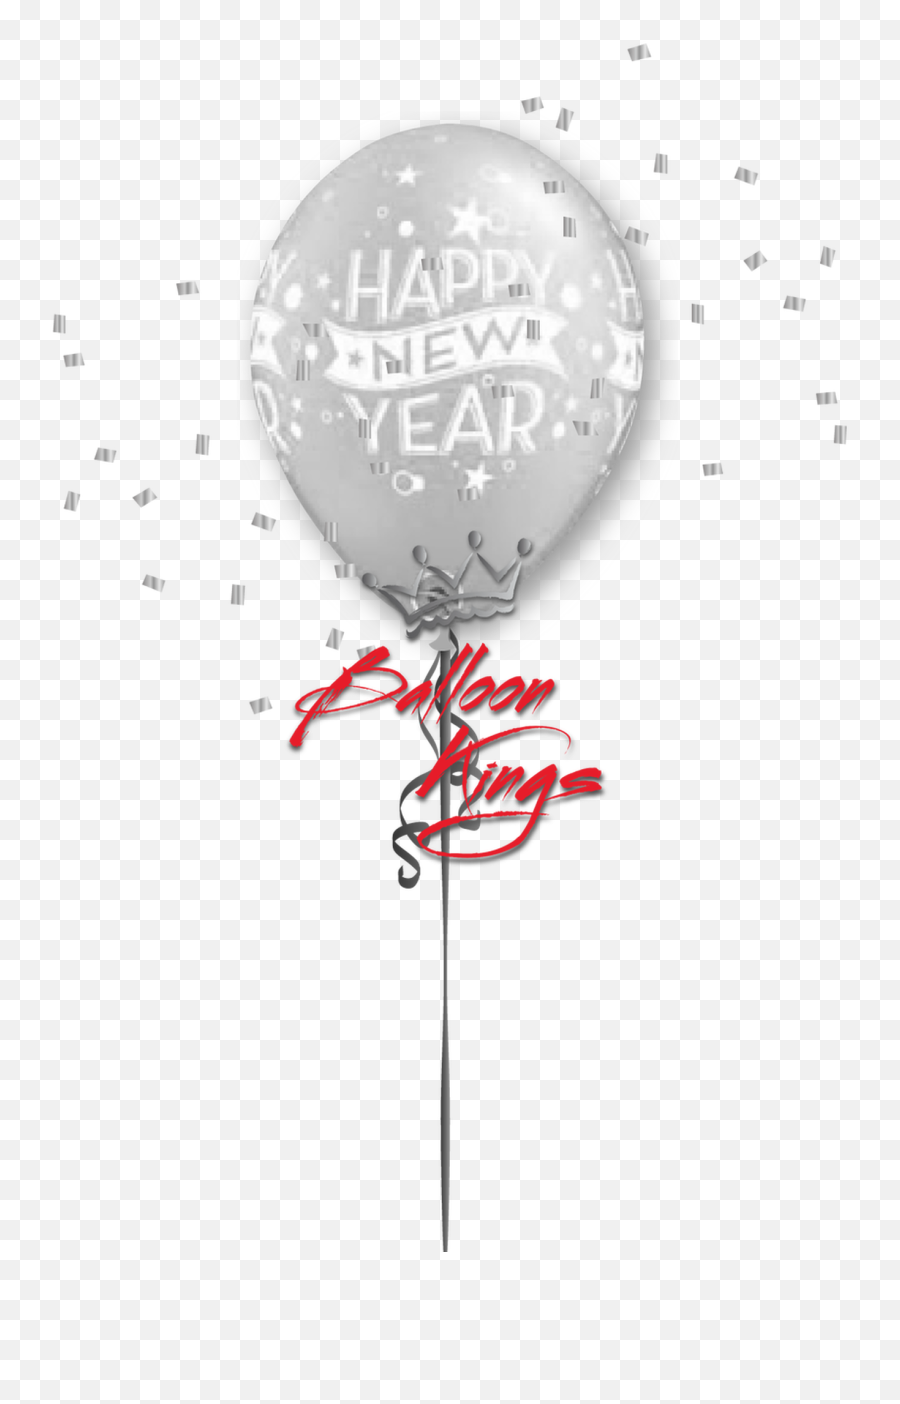 11in Latex New Year Confetti - Background Picsart Hd New Editing Png,Silver Confetti Png